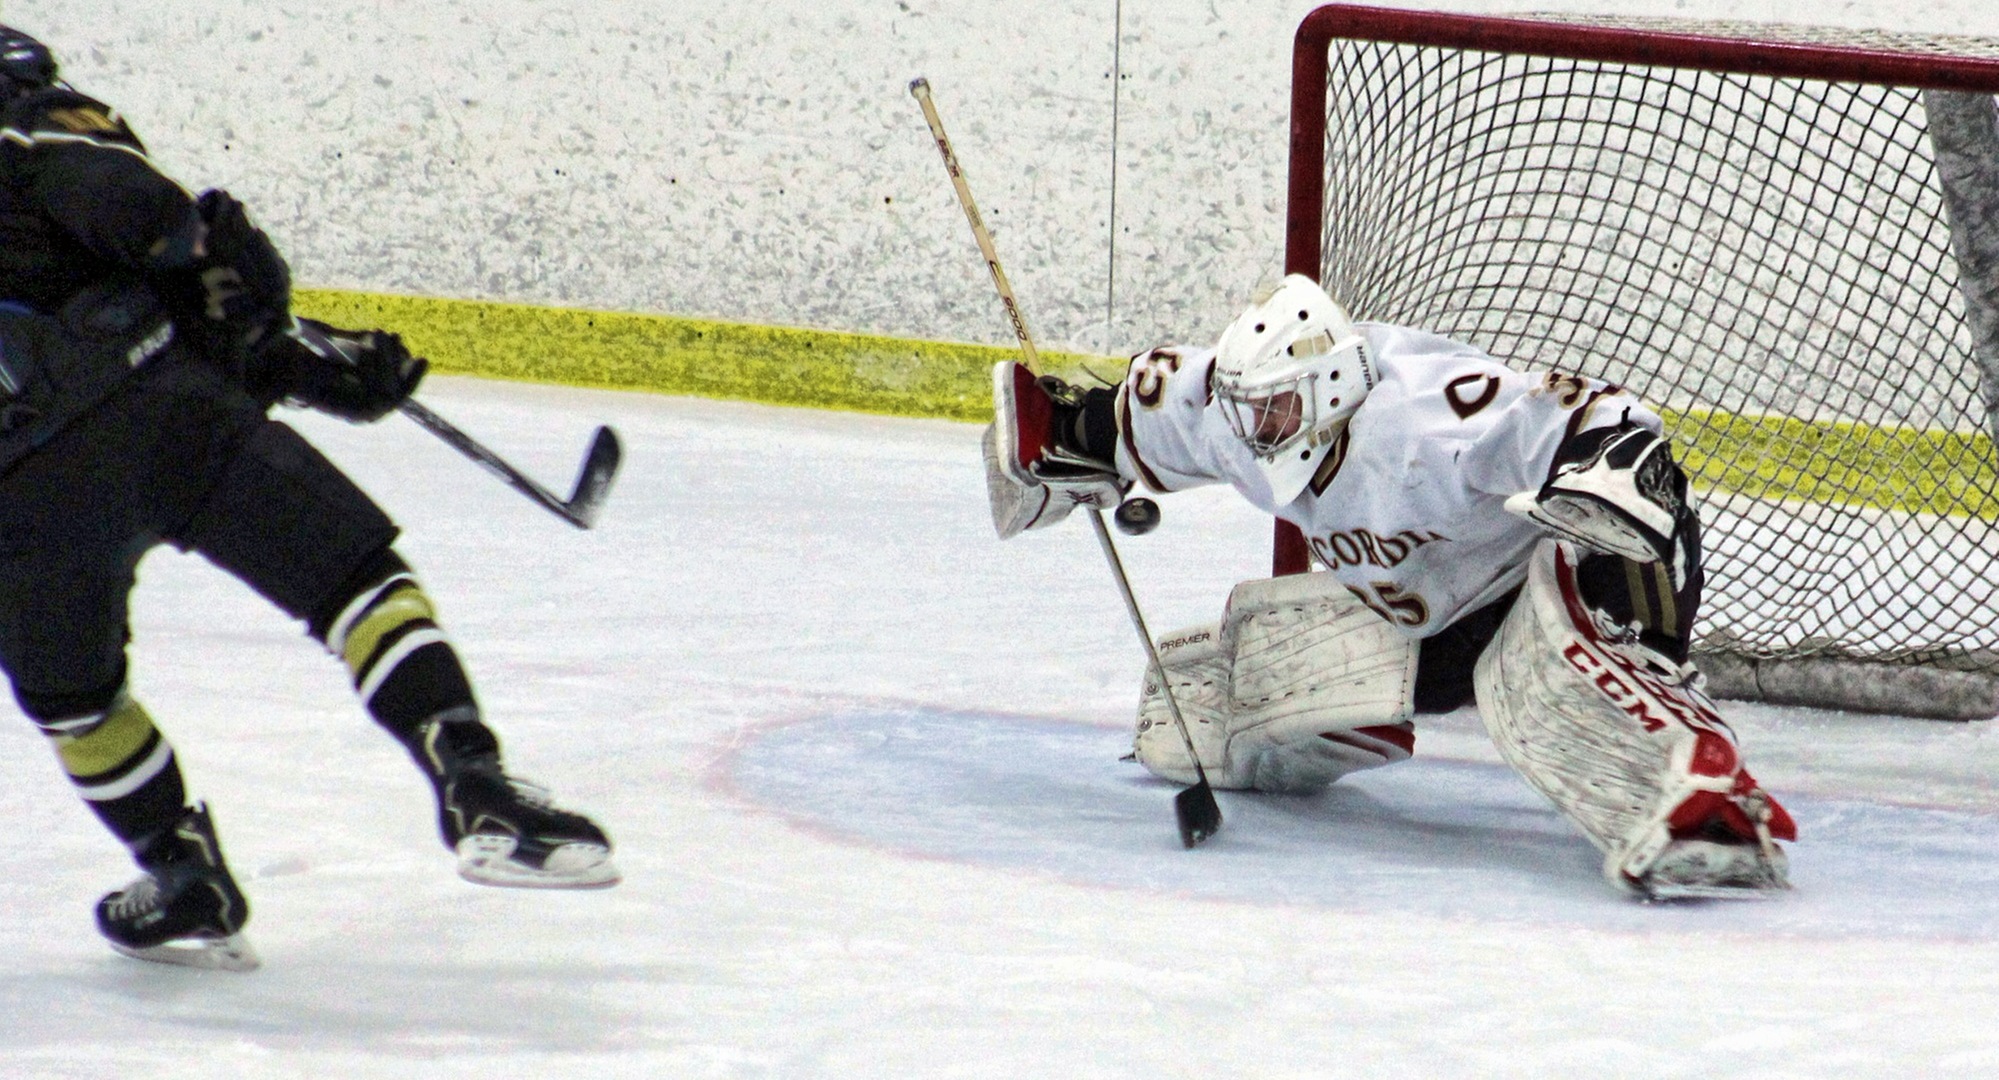 Freshman goalie Sam Nelson makes a save in the shootout in the Cobbers' game with St. Olaf. He stopped two of the three shootout attempts and several other breakaways in regulation.